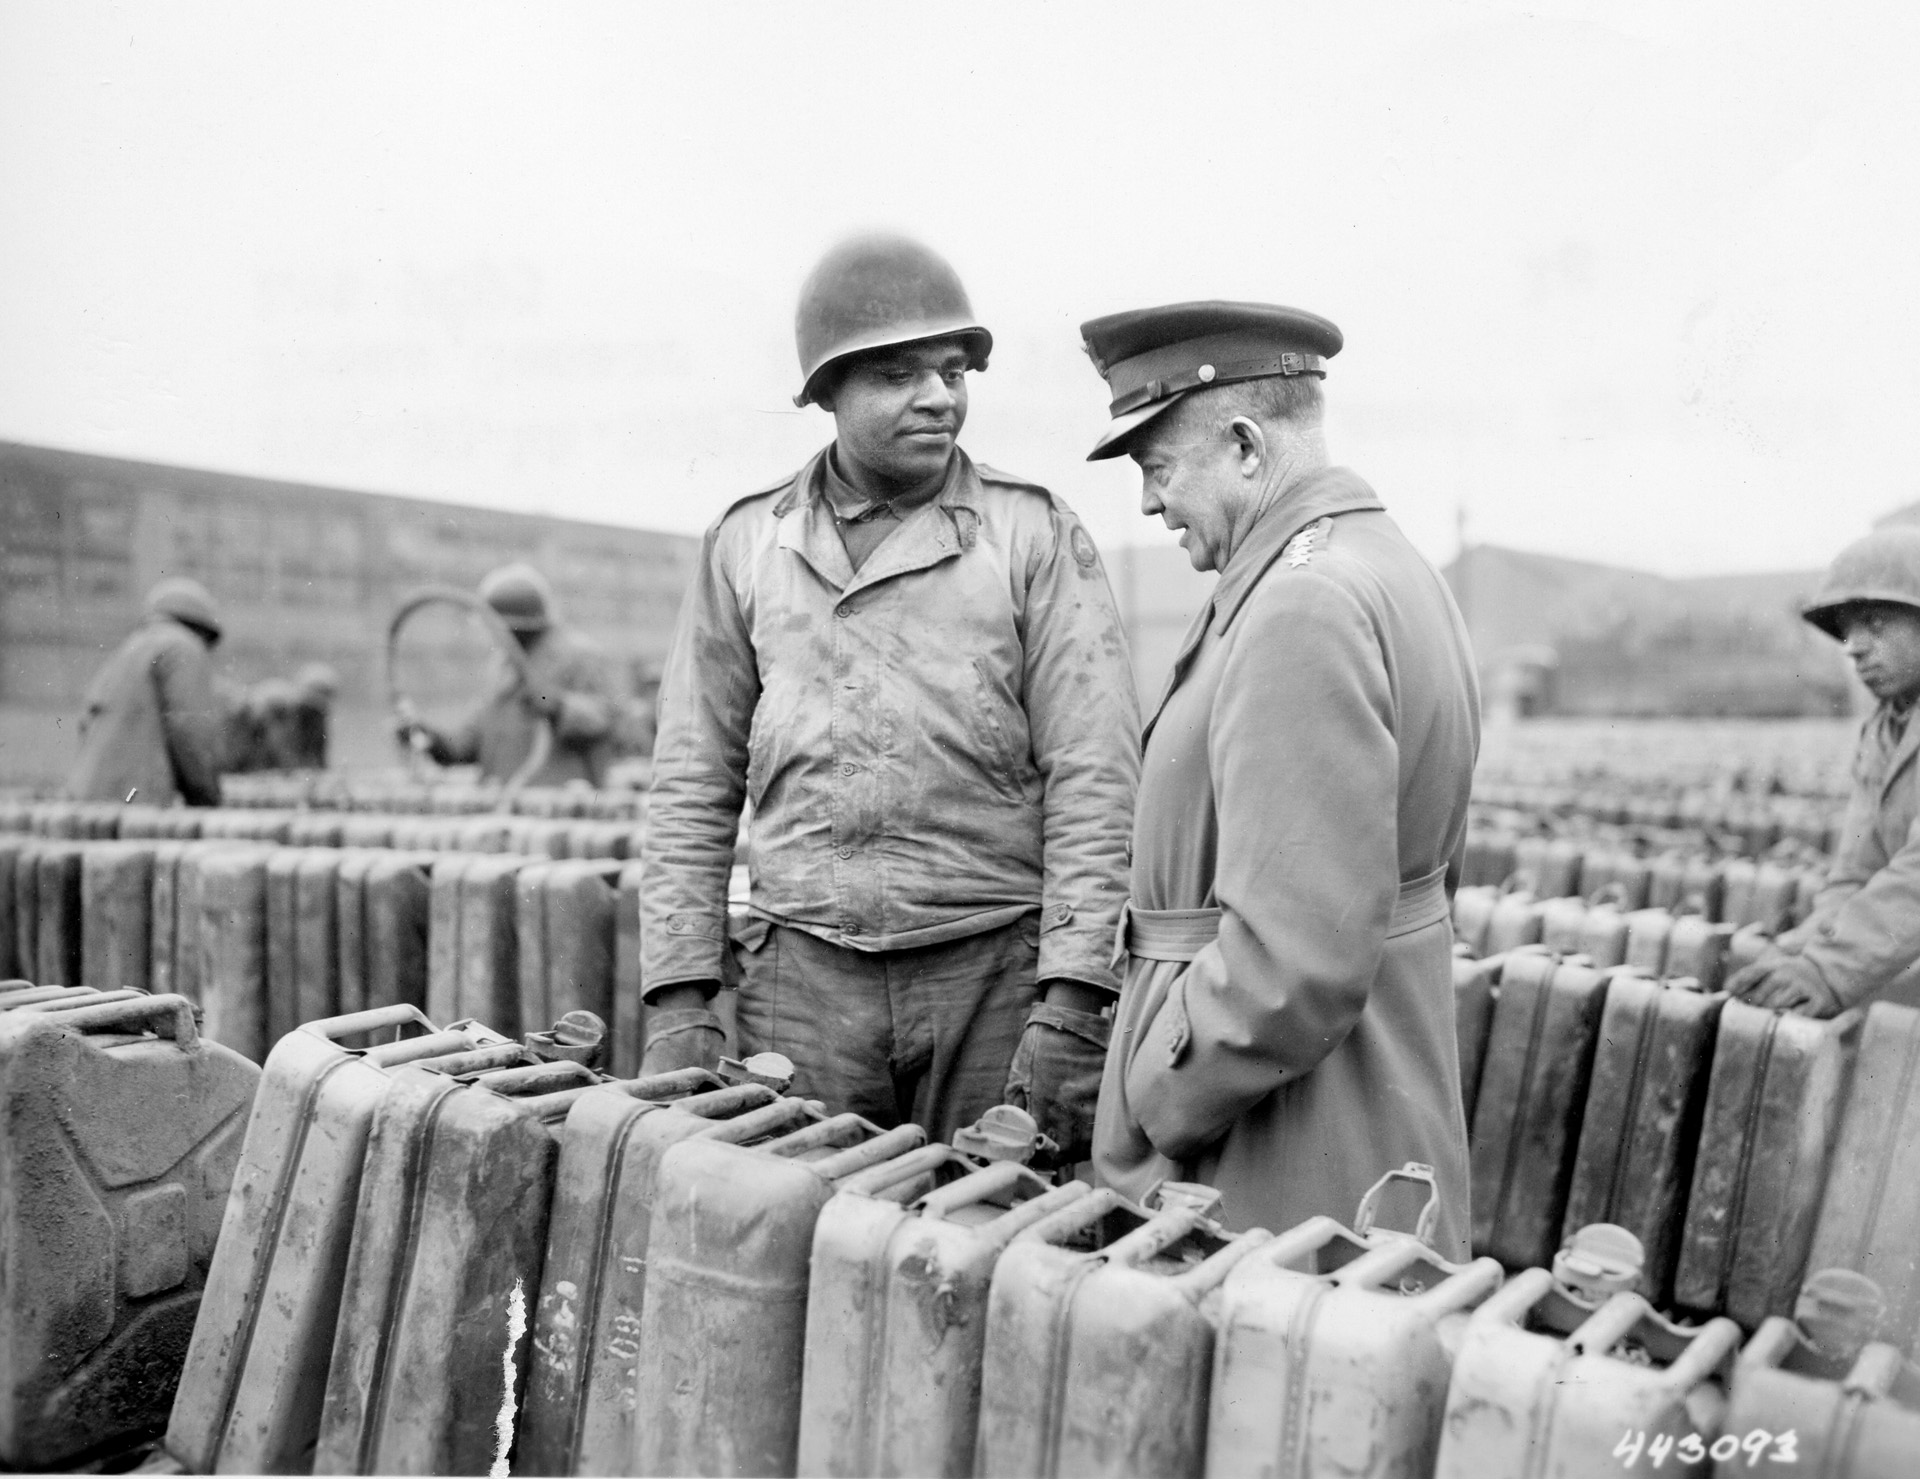 Private Edward Clay of New Iberia, Louisiana, explains the fuel situation with Eisenhower. The lack of gasoline seriously hampered all of Eisenhower’s armies as they reached the  German border.